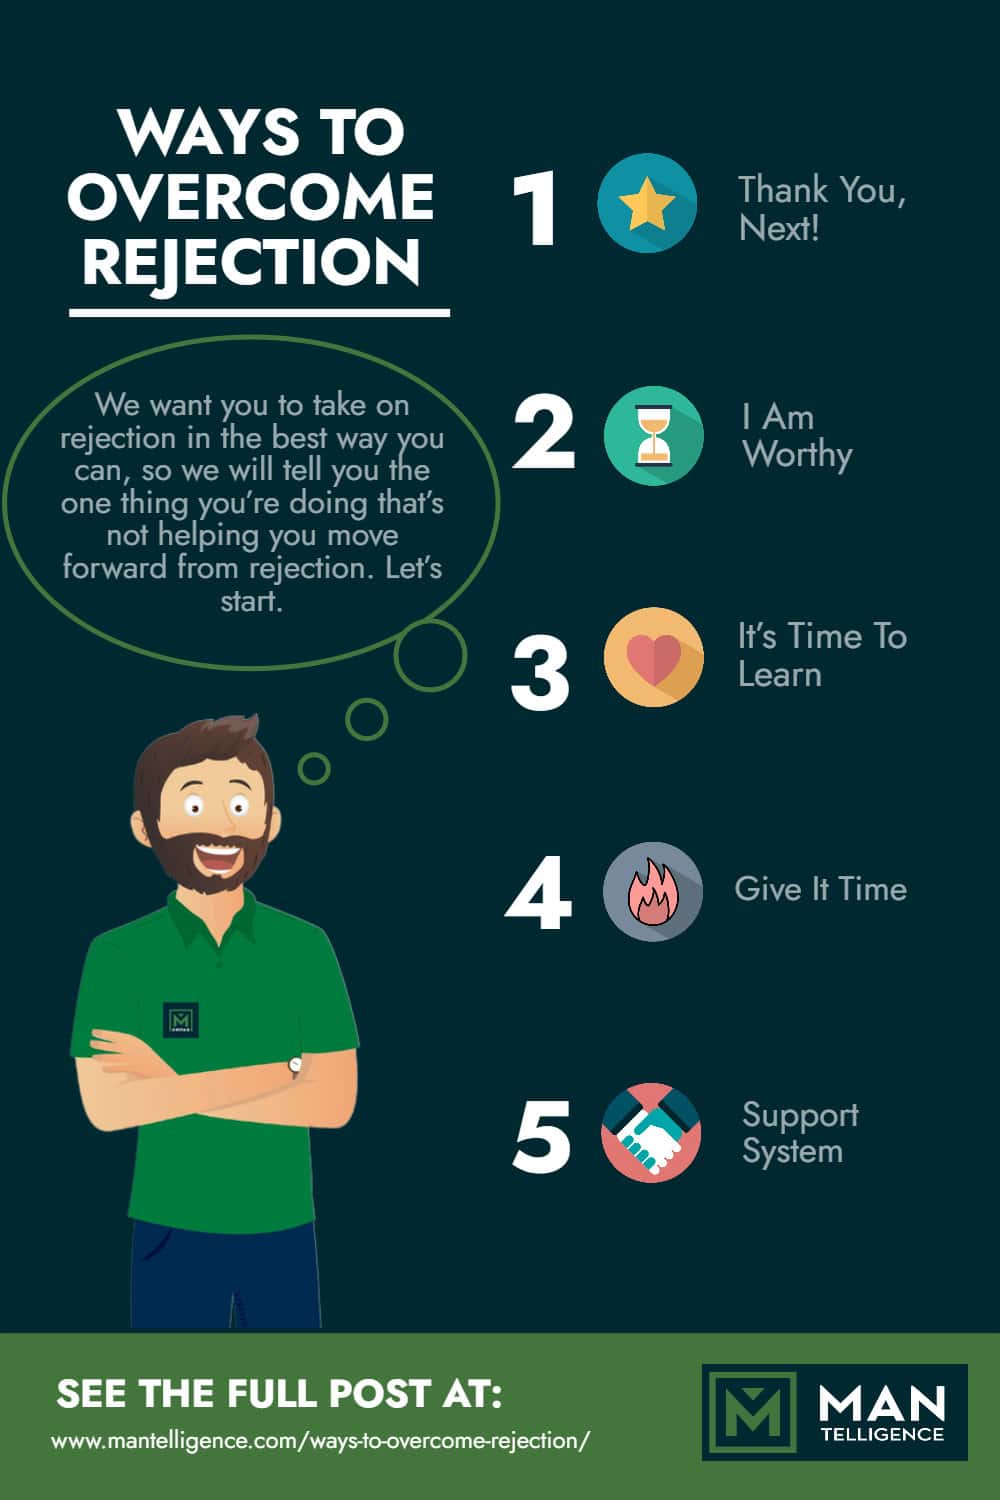 Ways To Overcome Rejection - Infographic